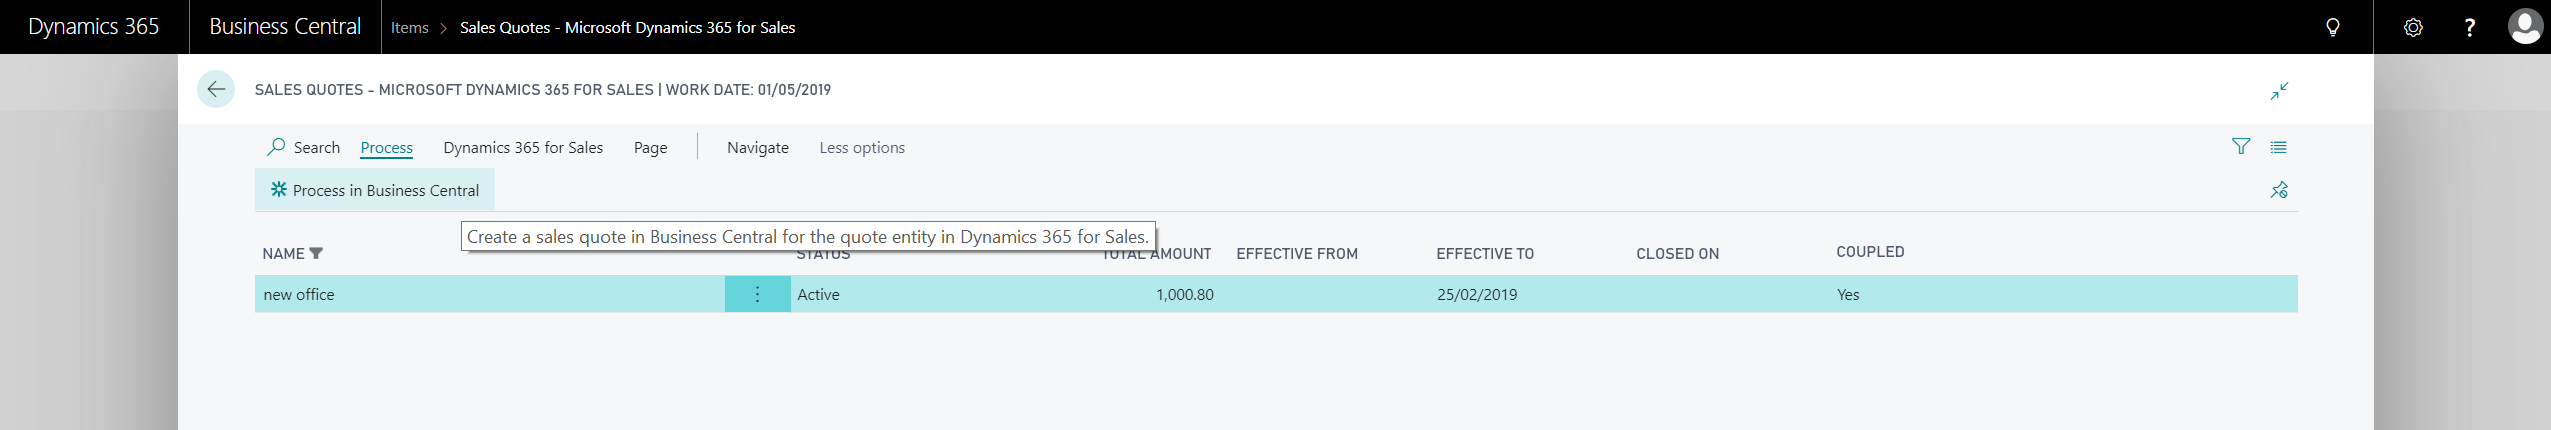 Process activated quotes from Dynamics 365 for Sales